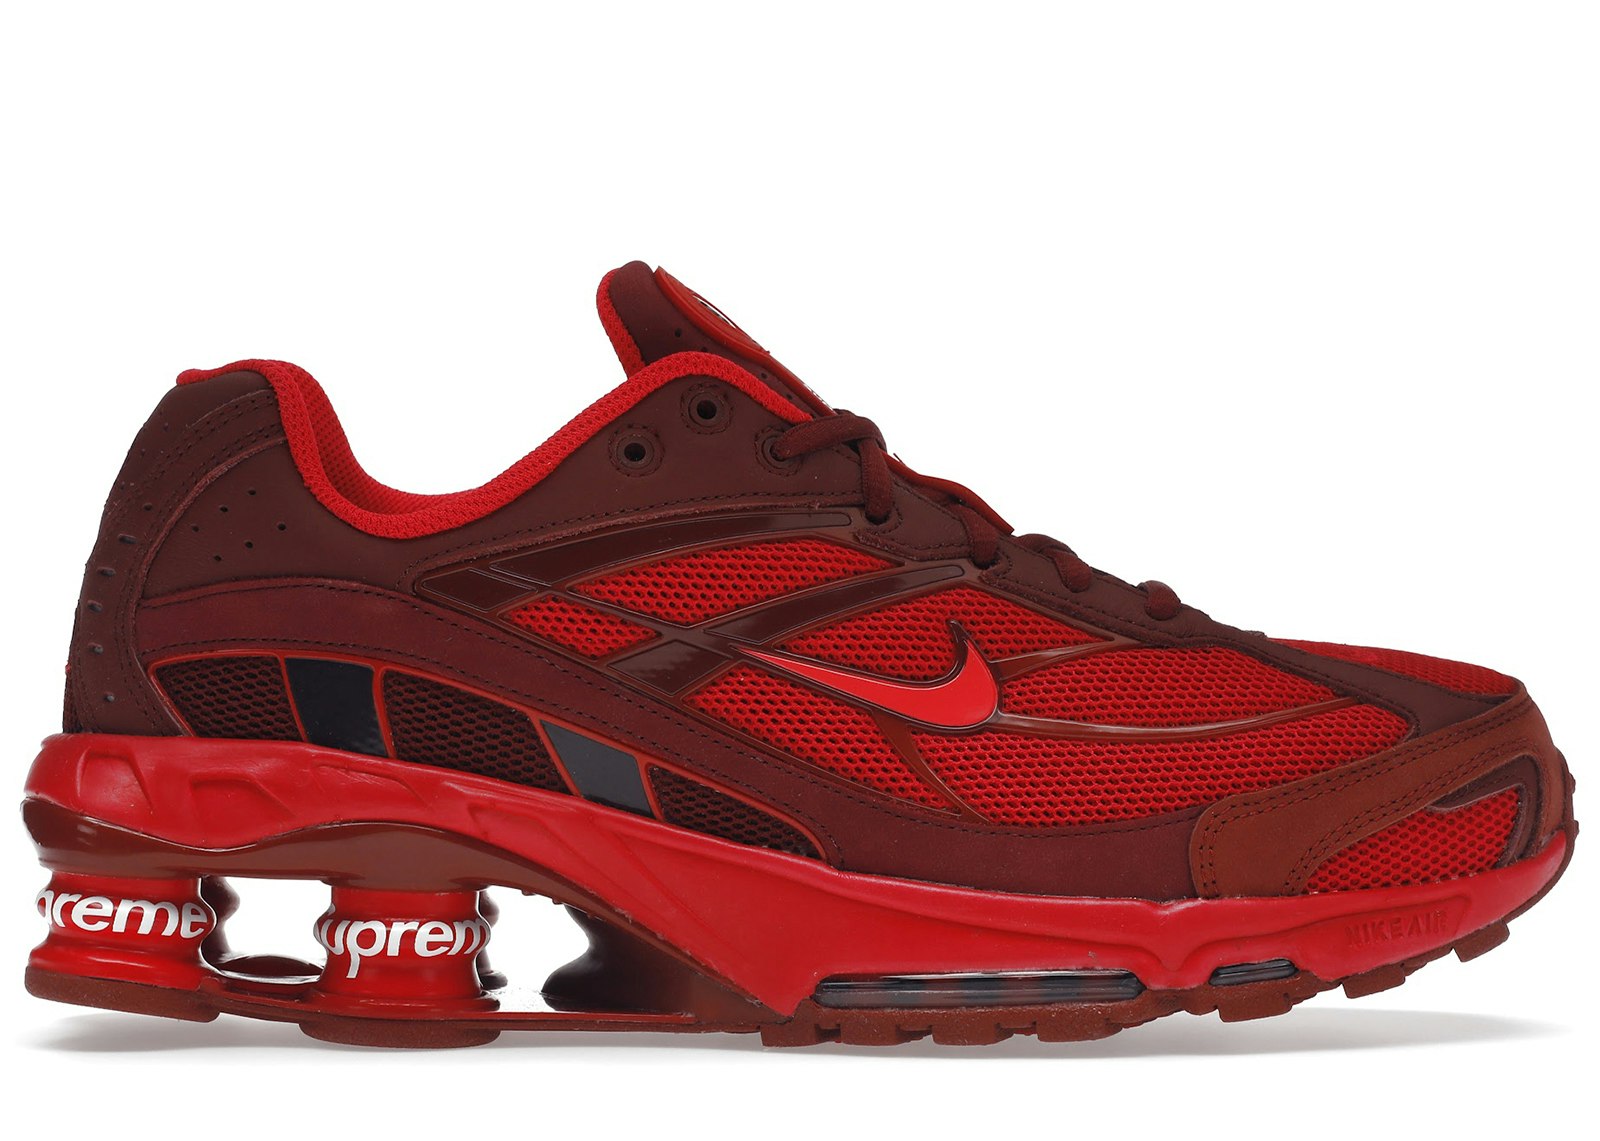 Discover more than 114 supreme red sneakers super hot